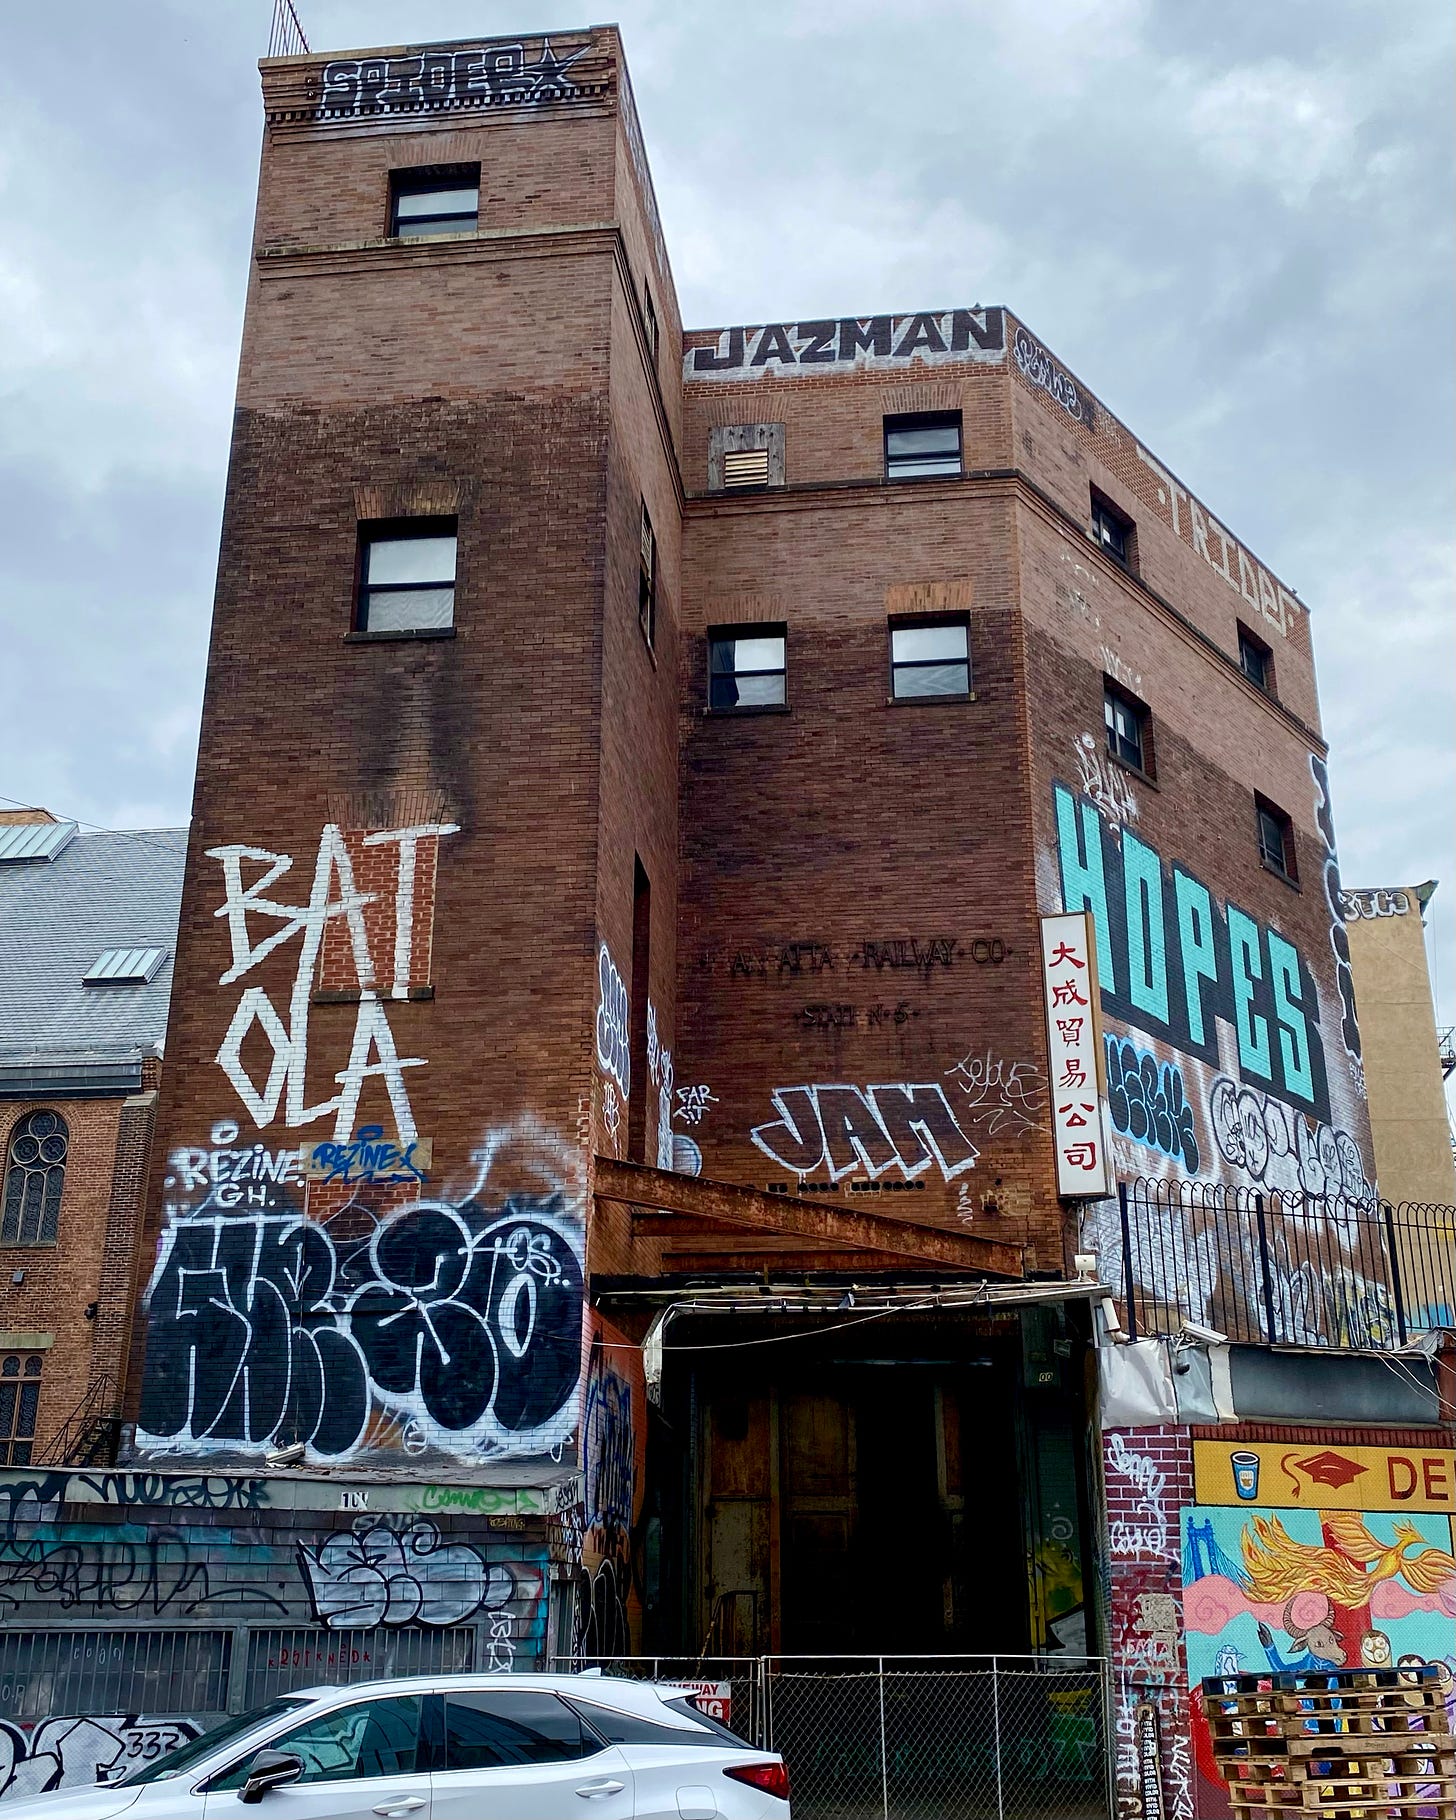 A brick building covered in graffiti. There is a sign in Chinese on one corner. Letters are missing, but you can still make out that this was marked Manhattan Railway Co.